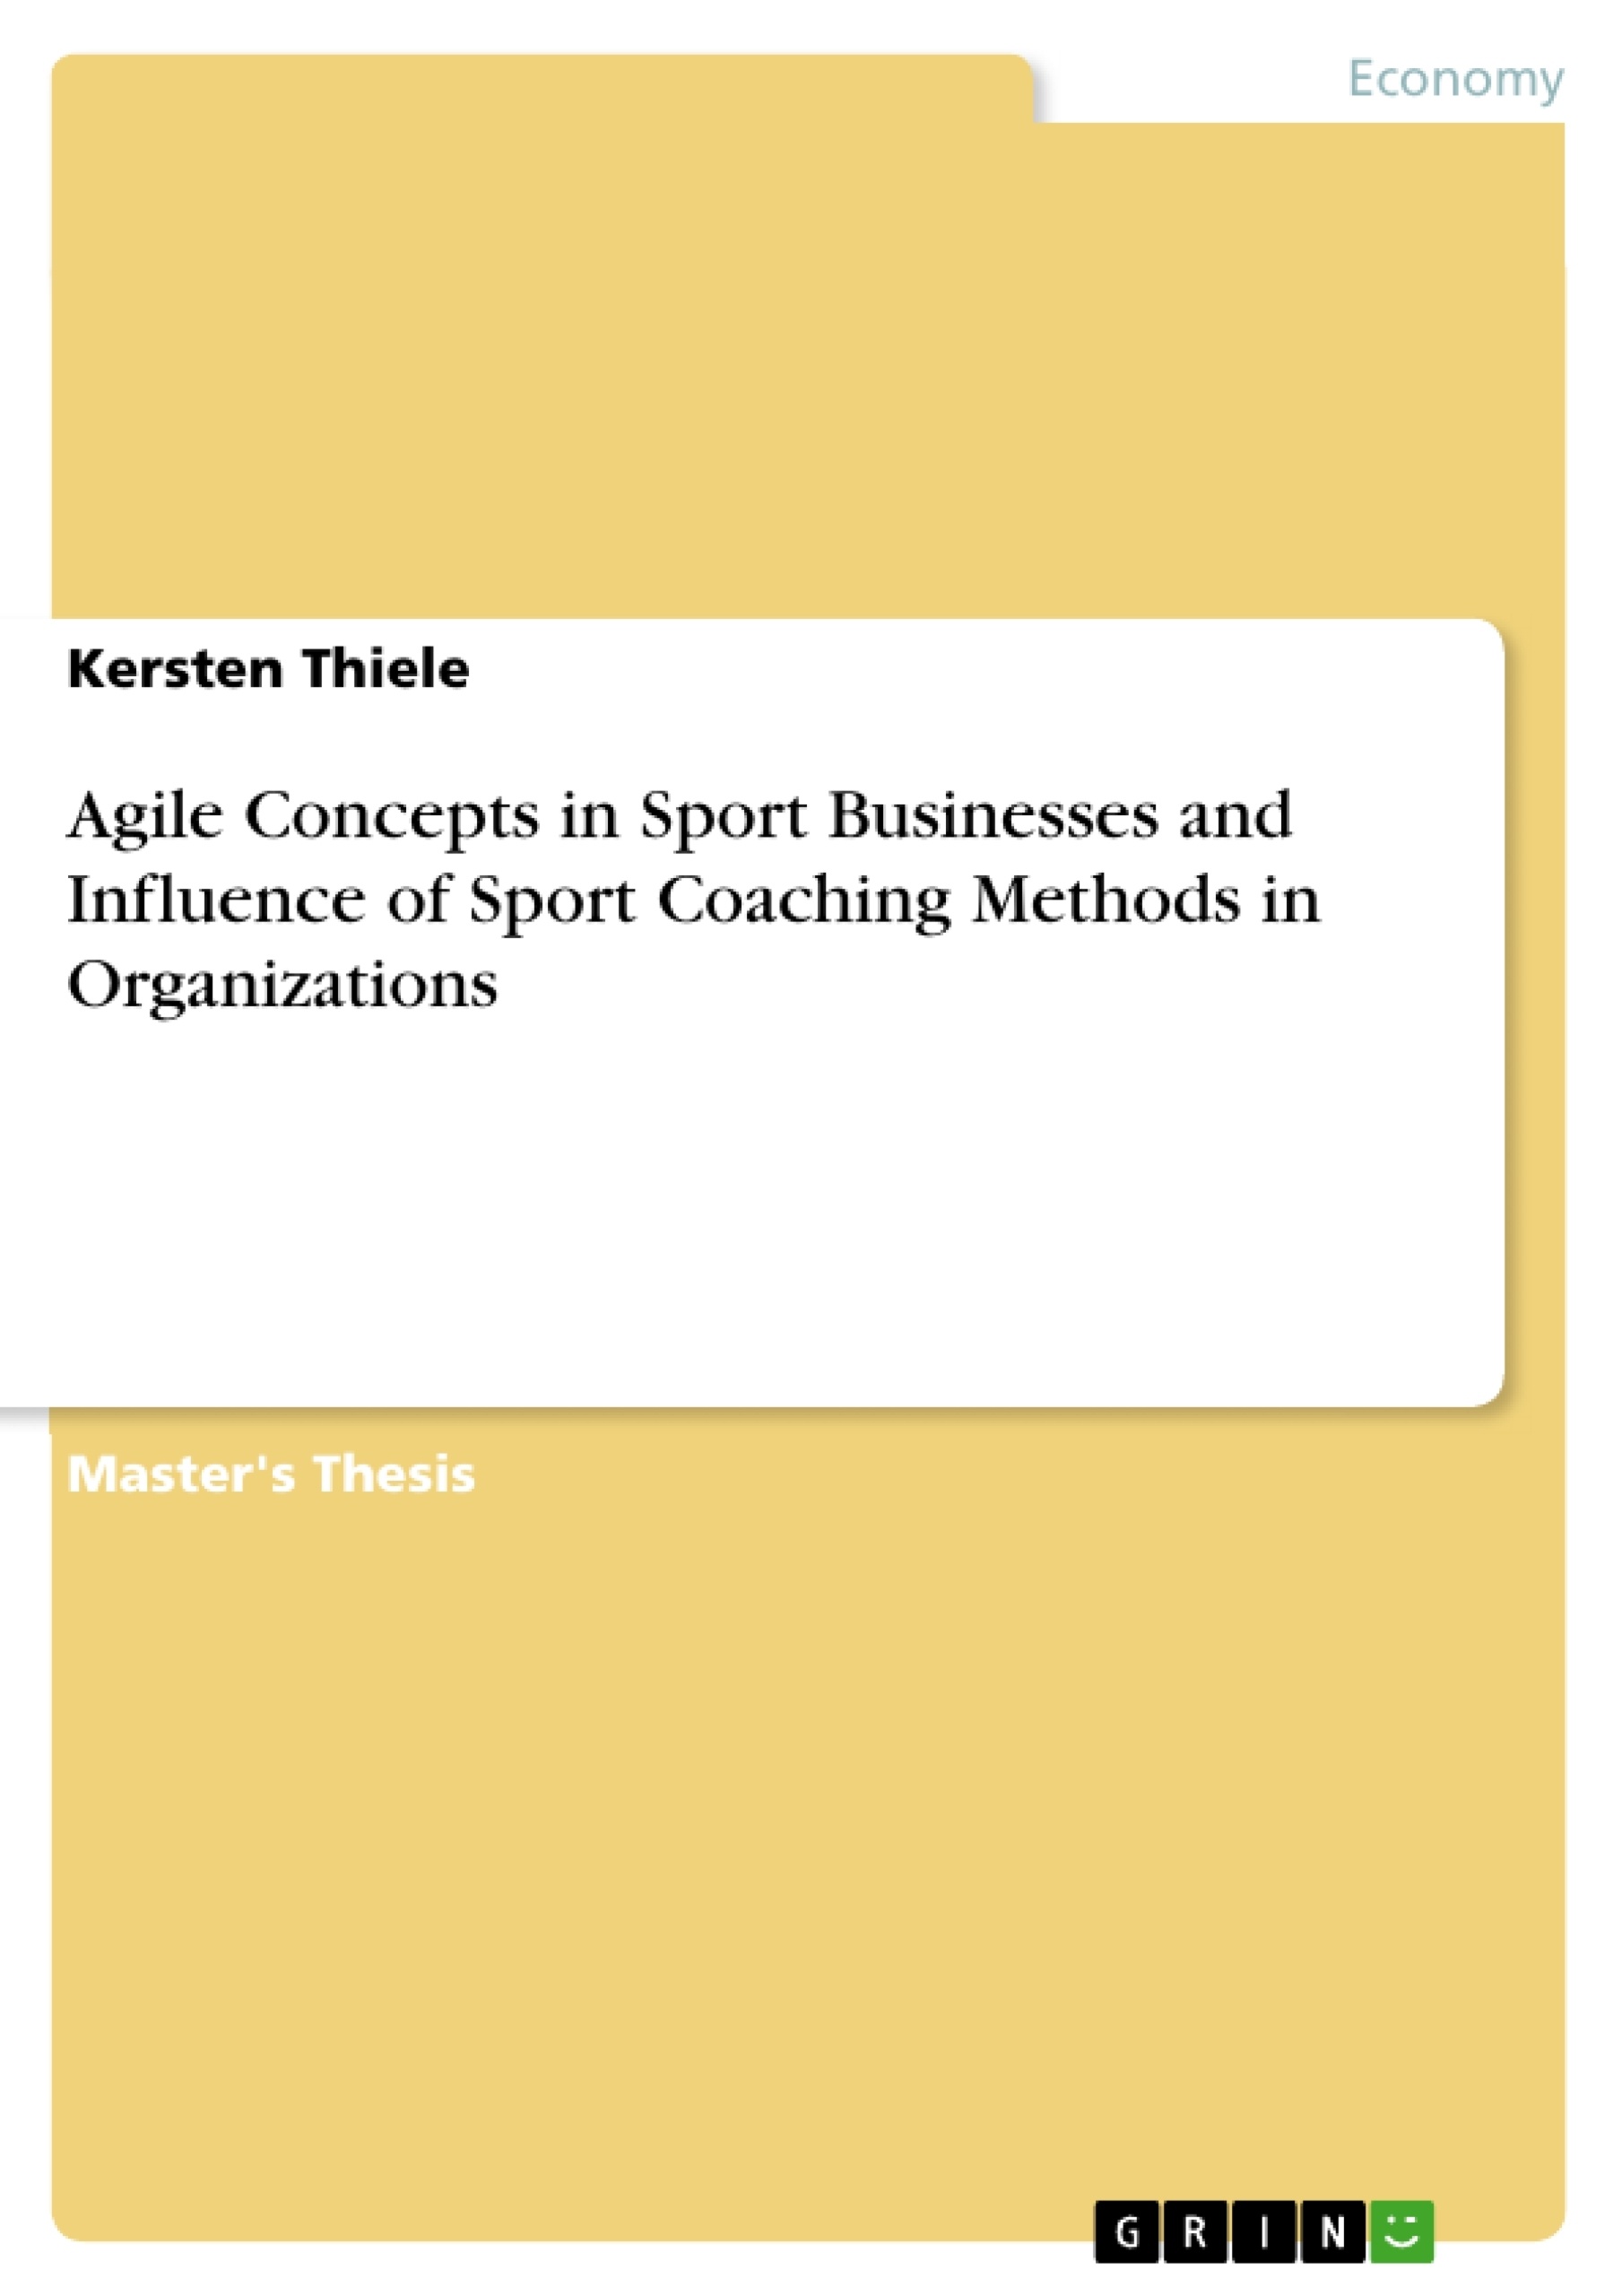 Title: Agile Concepts in Sport Businesses and Influence of Sport Coaching Methods in Organizations